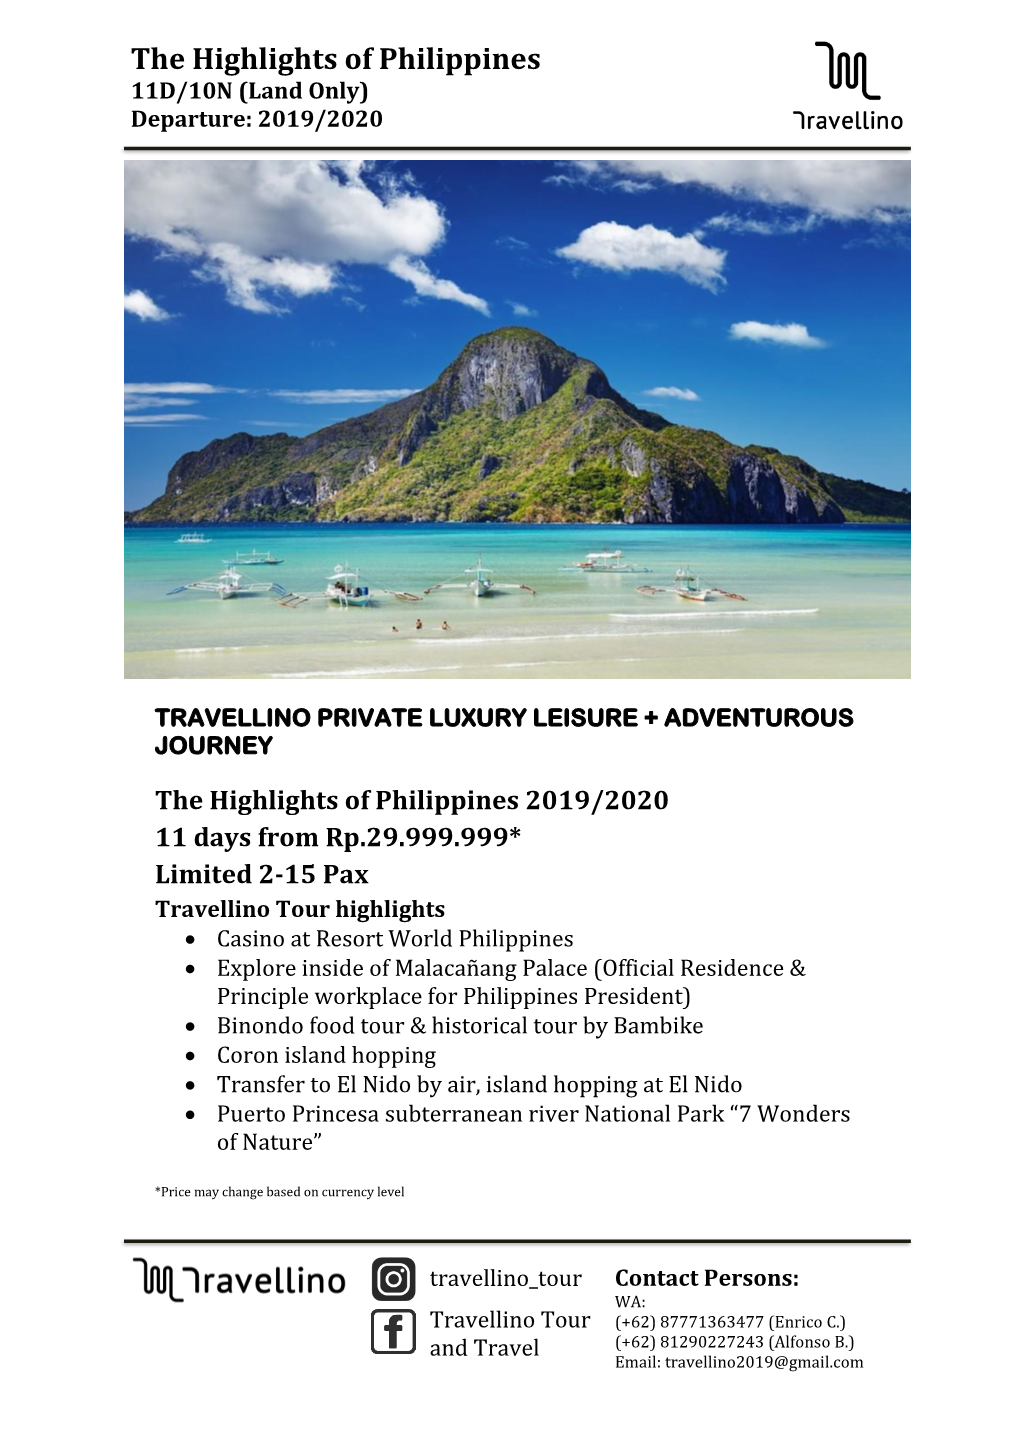 The Highlights of Philippines 11D/10N (Land Only) Departure: 2019/2020